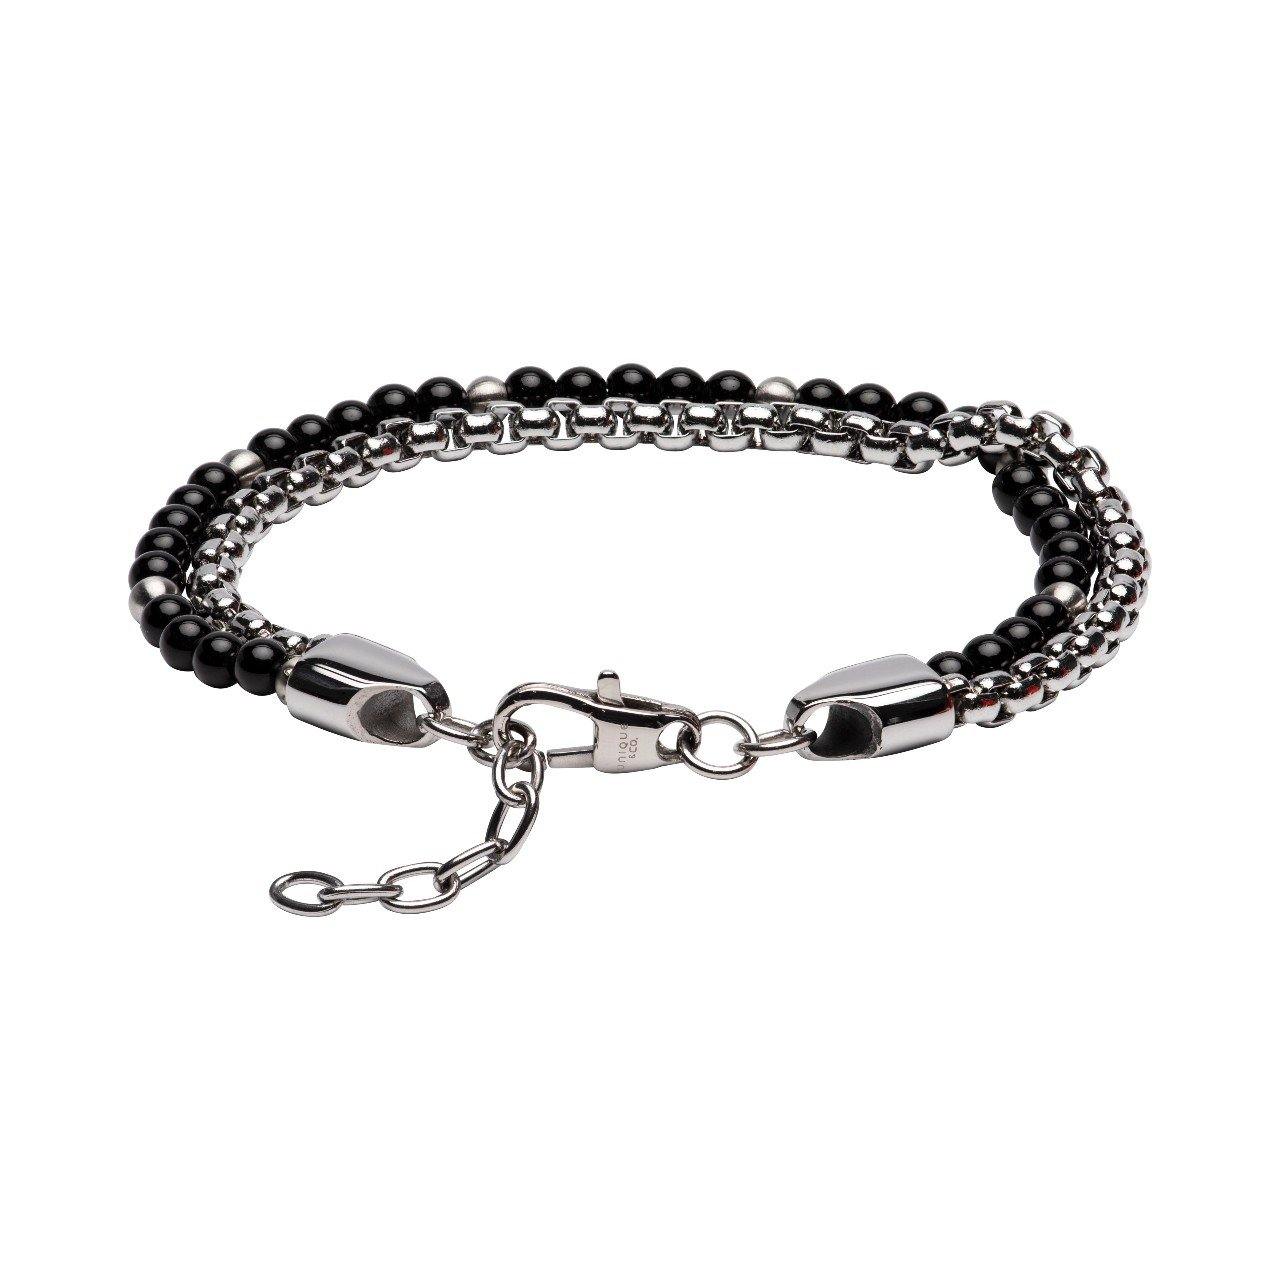 Unique & Co Black Onyx Beads and Stainless Steel Chain Bracelet - Rococo Jewellery